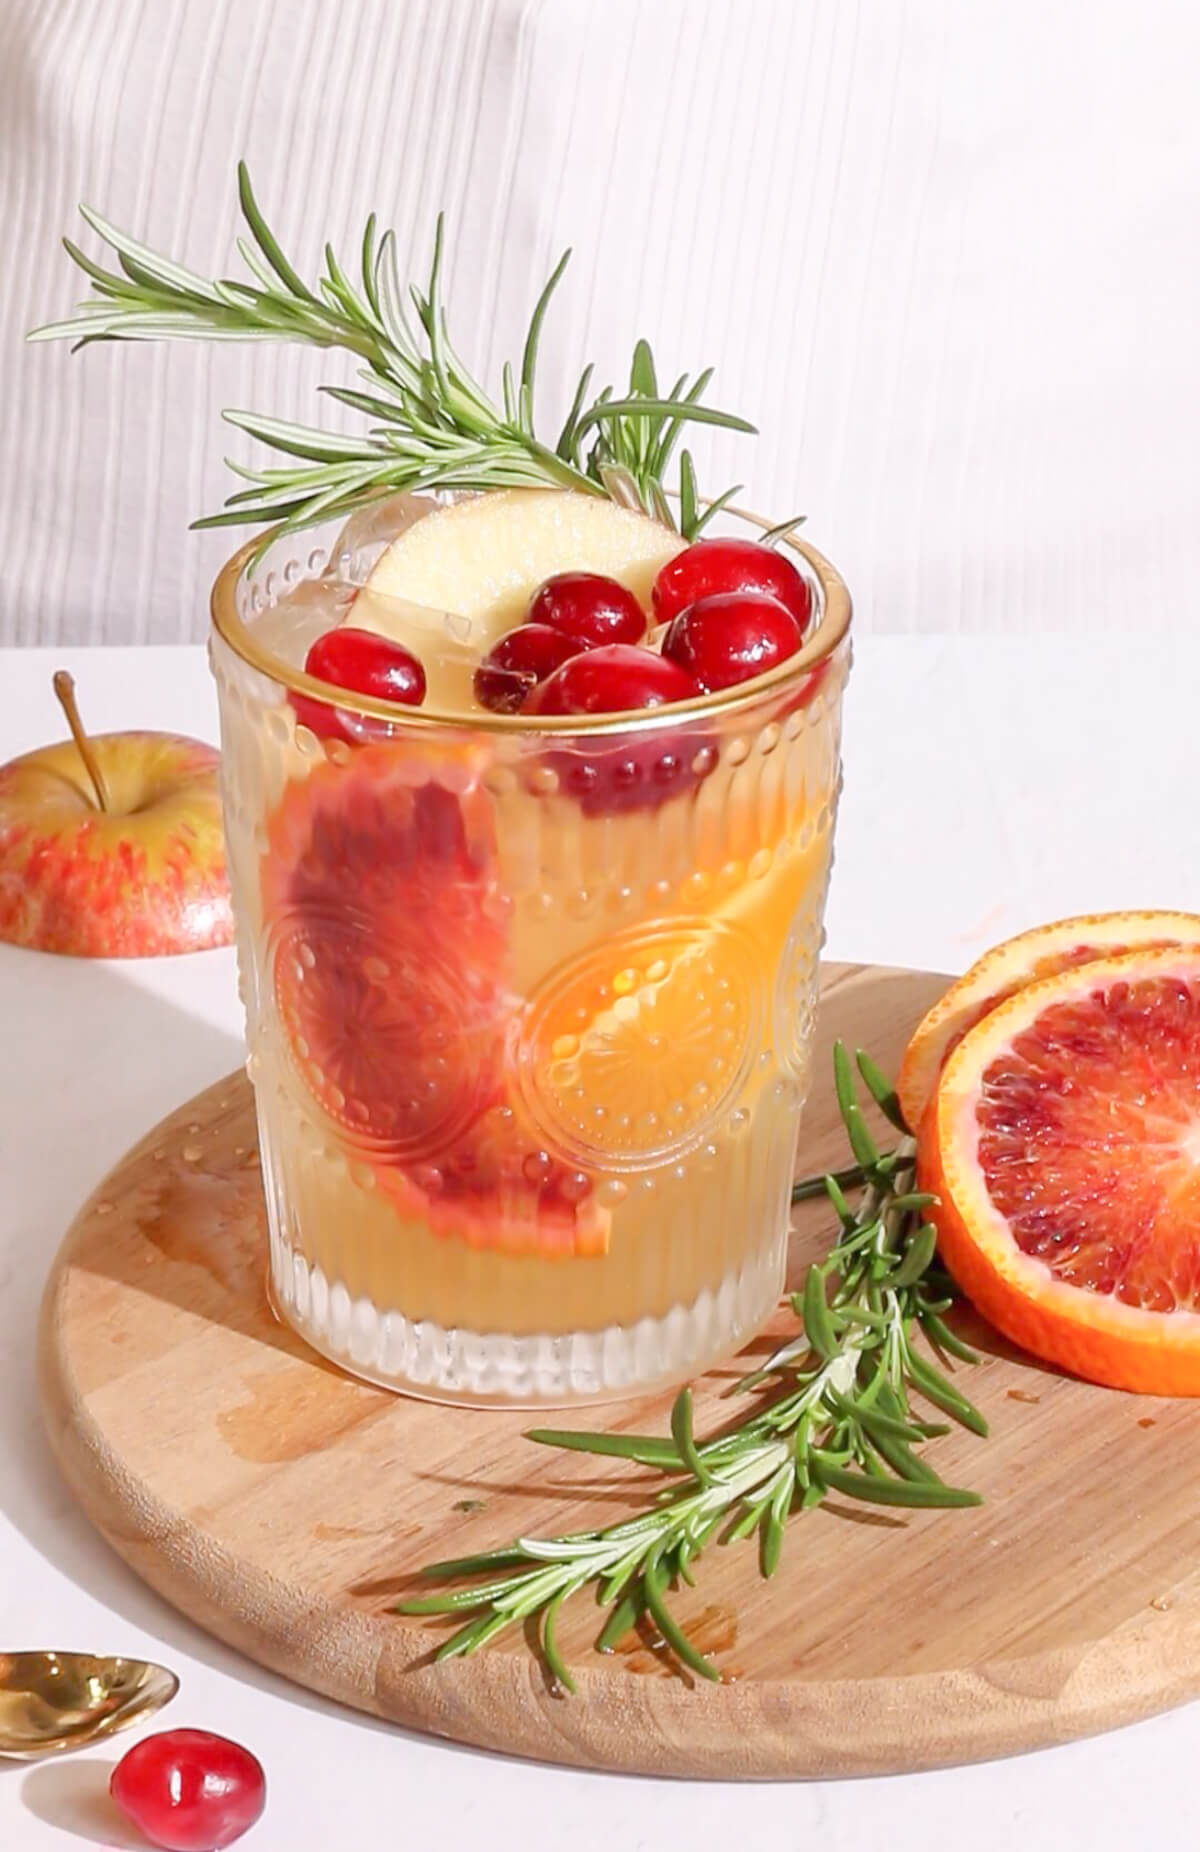 a yellow-orange punch in an intricate glass tumbler with a gold rim garnishe with blood orange cranberries and rosemary on a wooden board with rosemary orange and apple scattered around it.